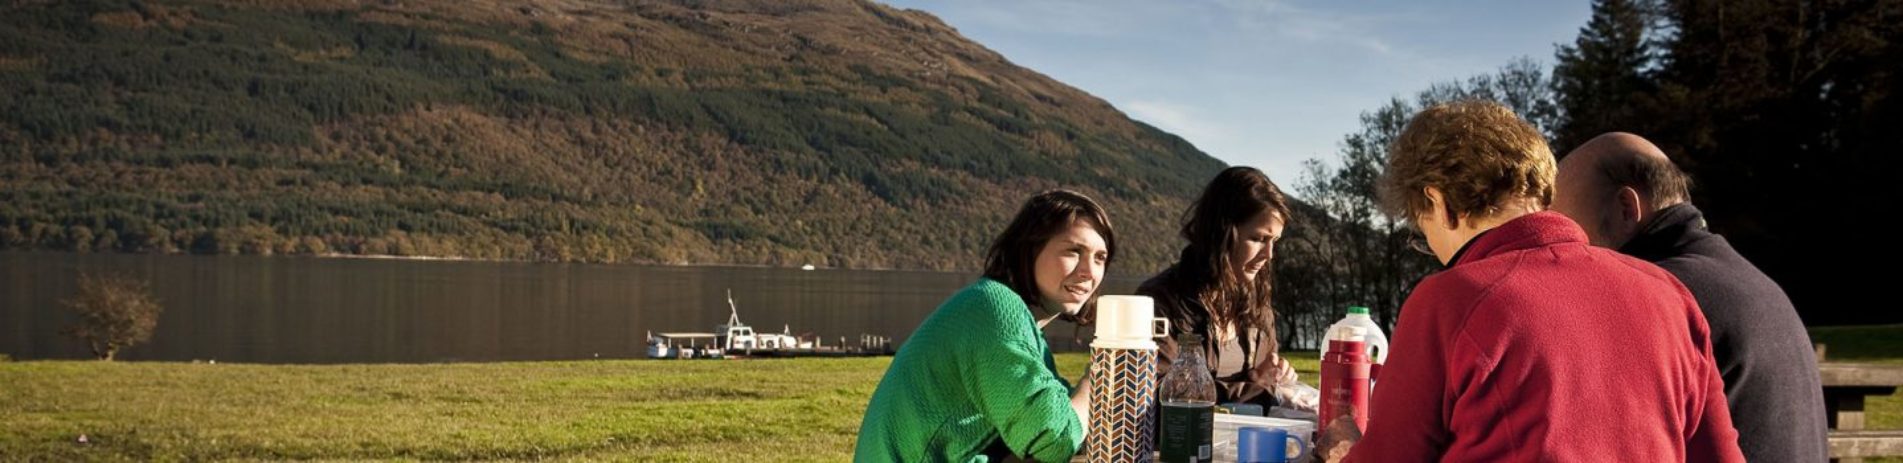 two-women-and-two-men-having-food-at-picnic-table-with-stunning-view-of-loch-and-hills-behind